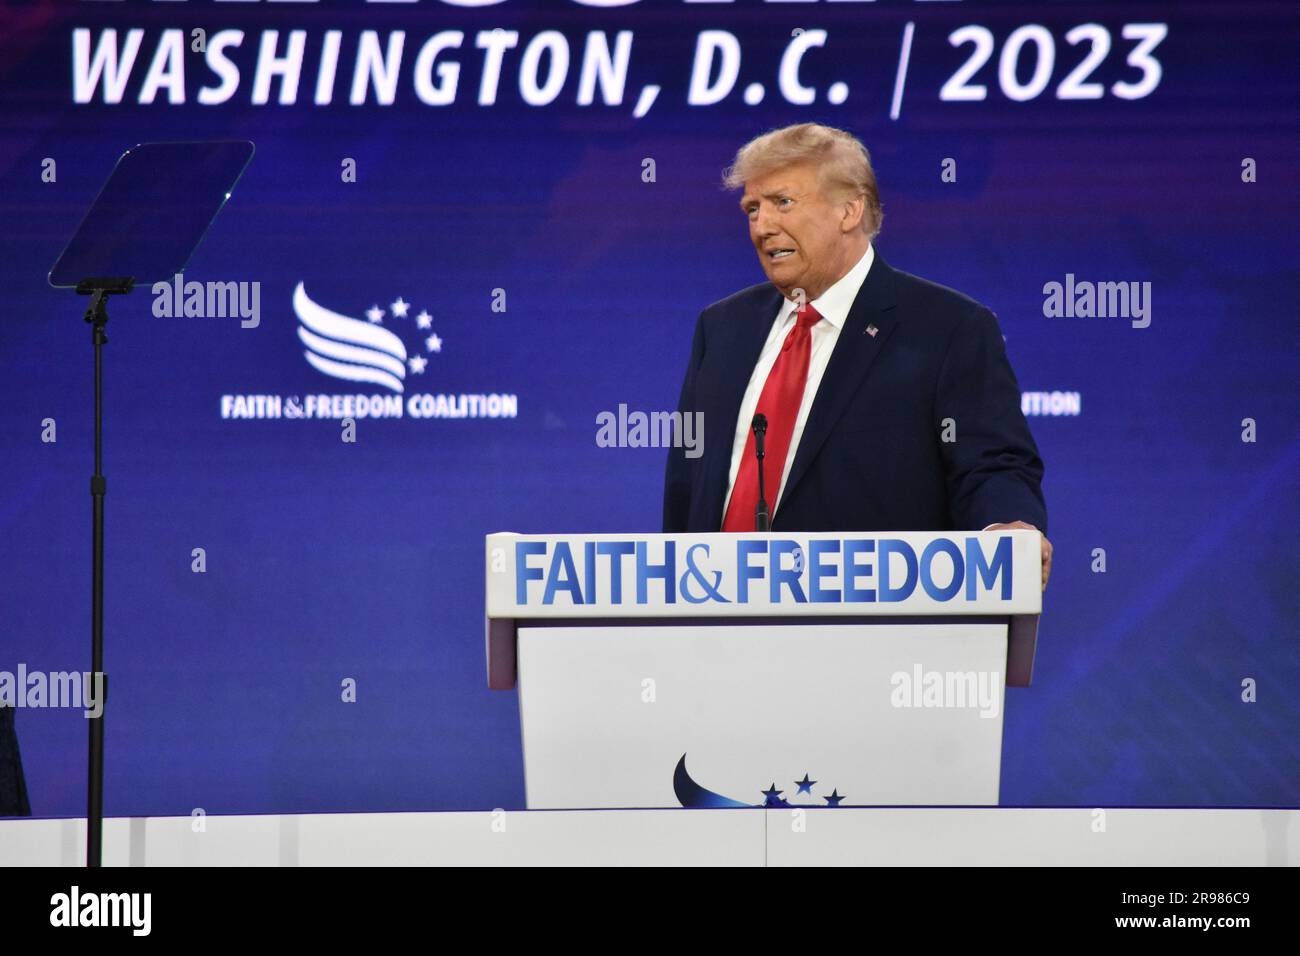 Washington DC, USA. 24th June, 2023. Former President of the United States Donald J. Trump reacts to Chris Christie being booed at the conference when he spoke against the former president on Friday morning, June 23, 2023. Former U.S. President Donald J. Trump claimed his innocence and said the classified documents investigation was a hoax. Credit: SOPA Images Limited/Alamy Live News Stock Photo